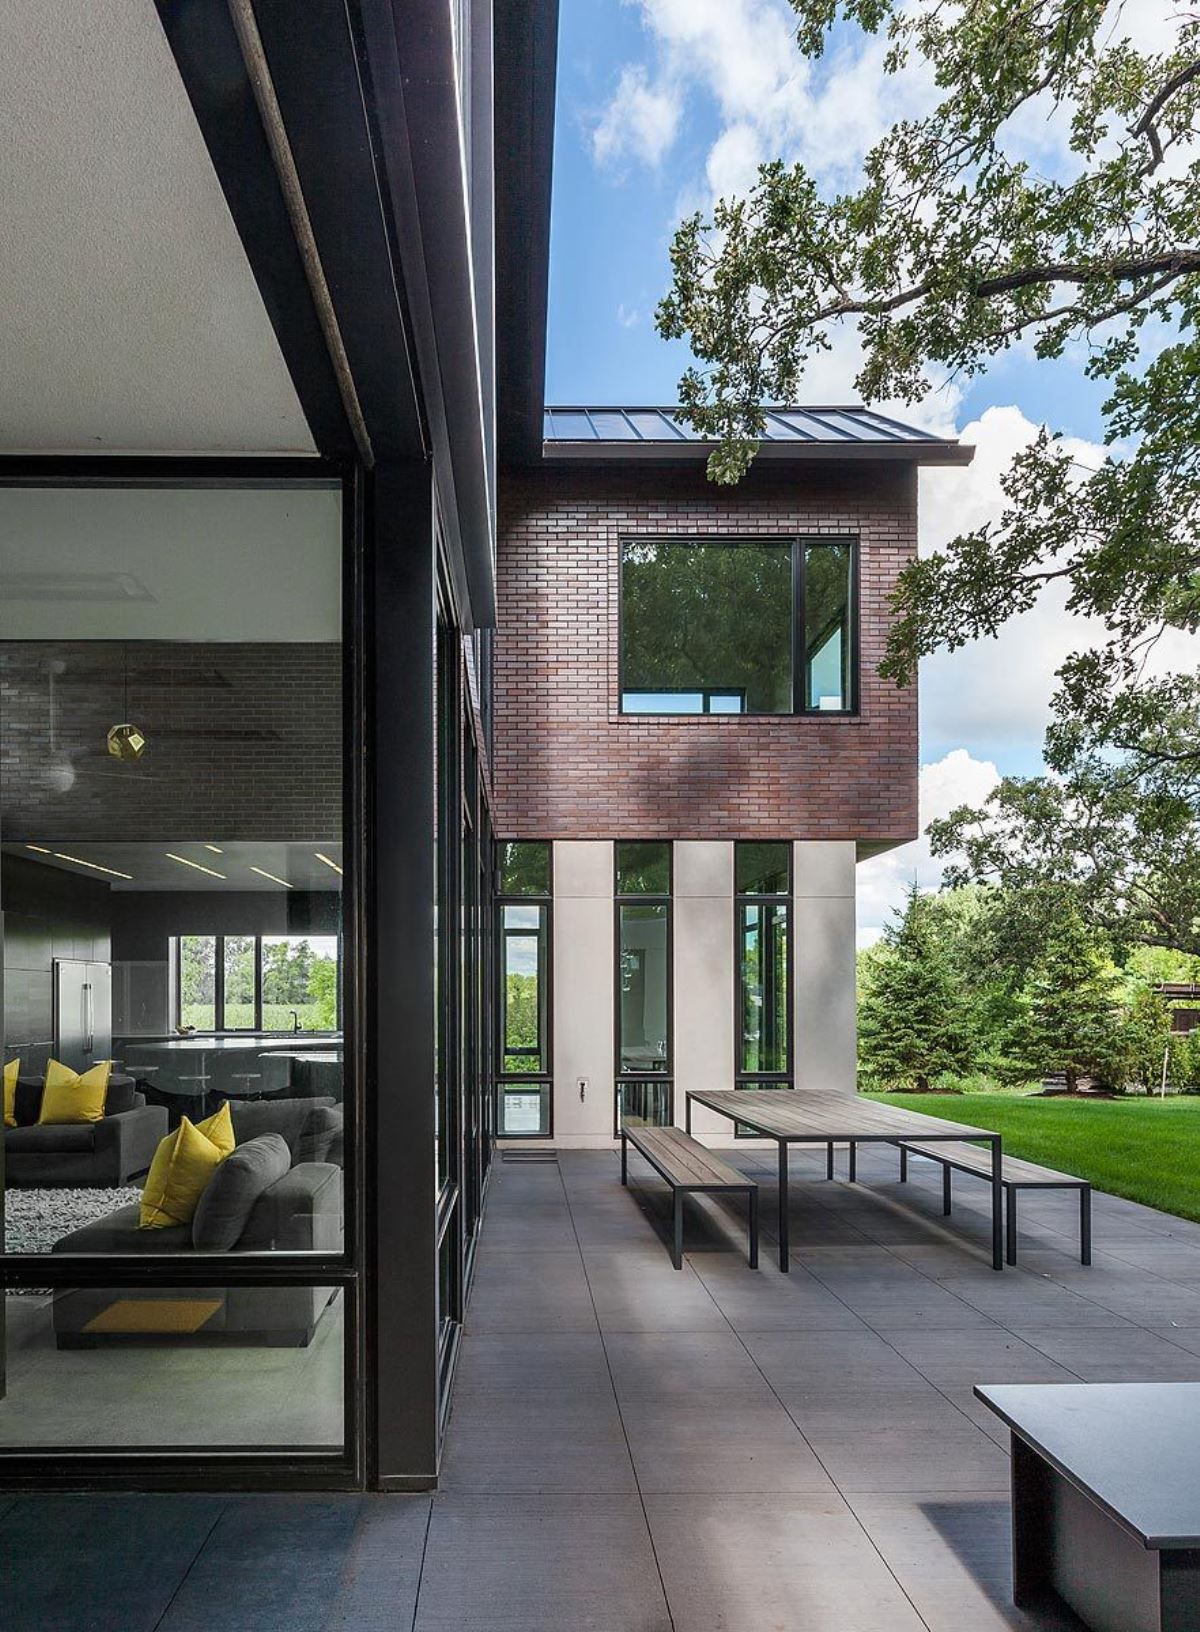 Lake-Waconia-House-in-Minnesota-by-ALTUS-Architecture-Design-7